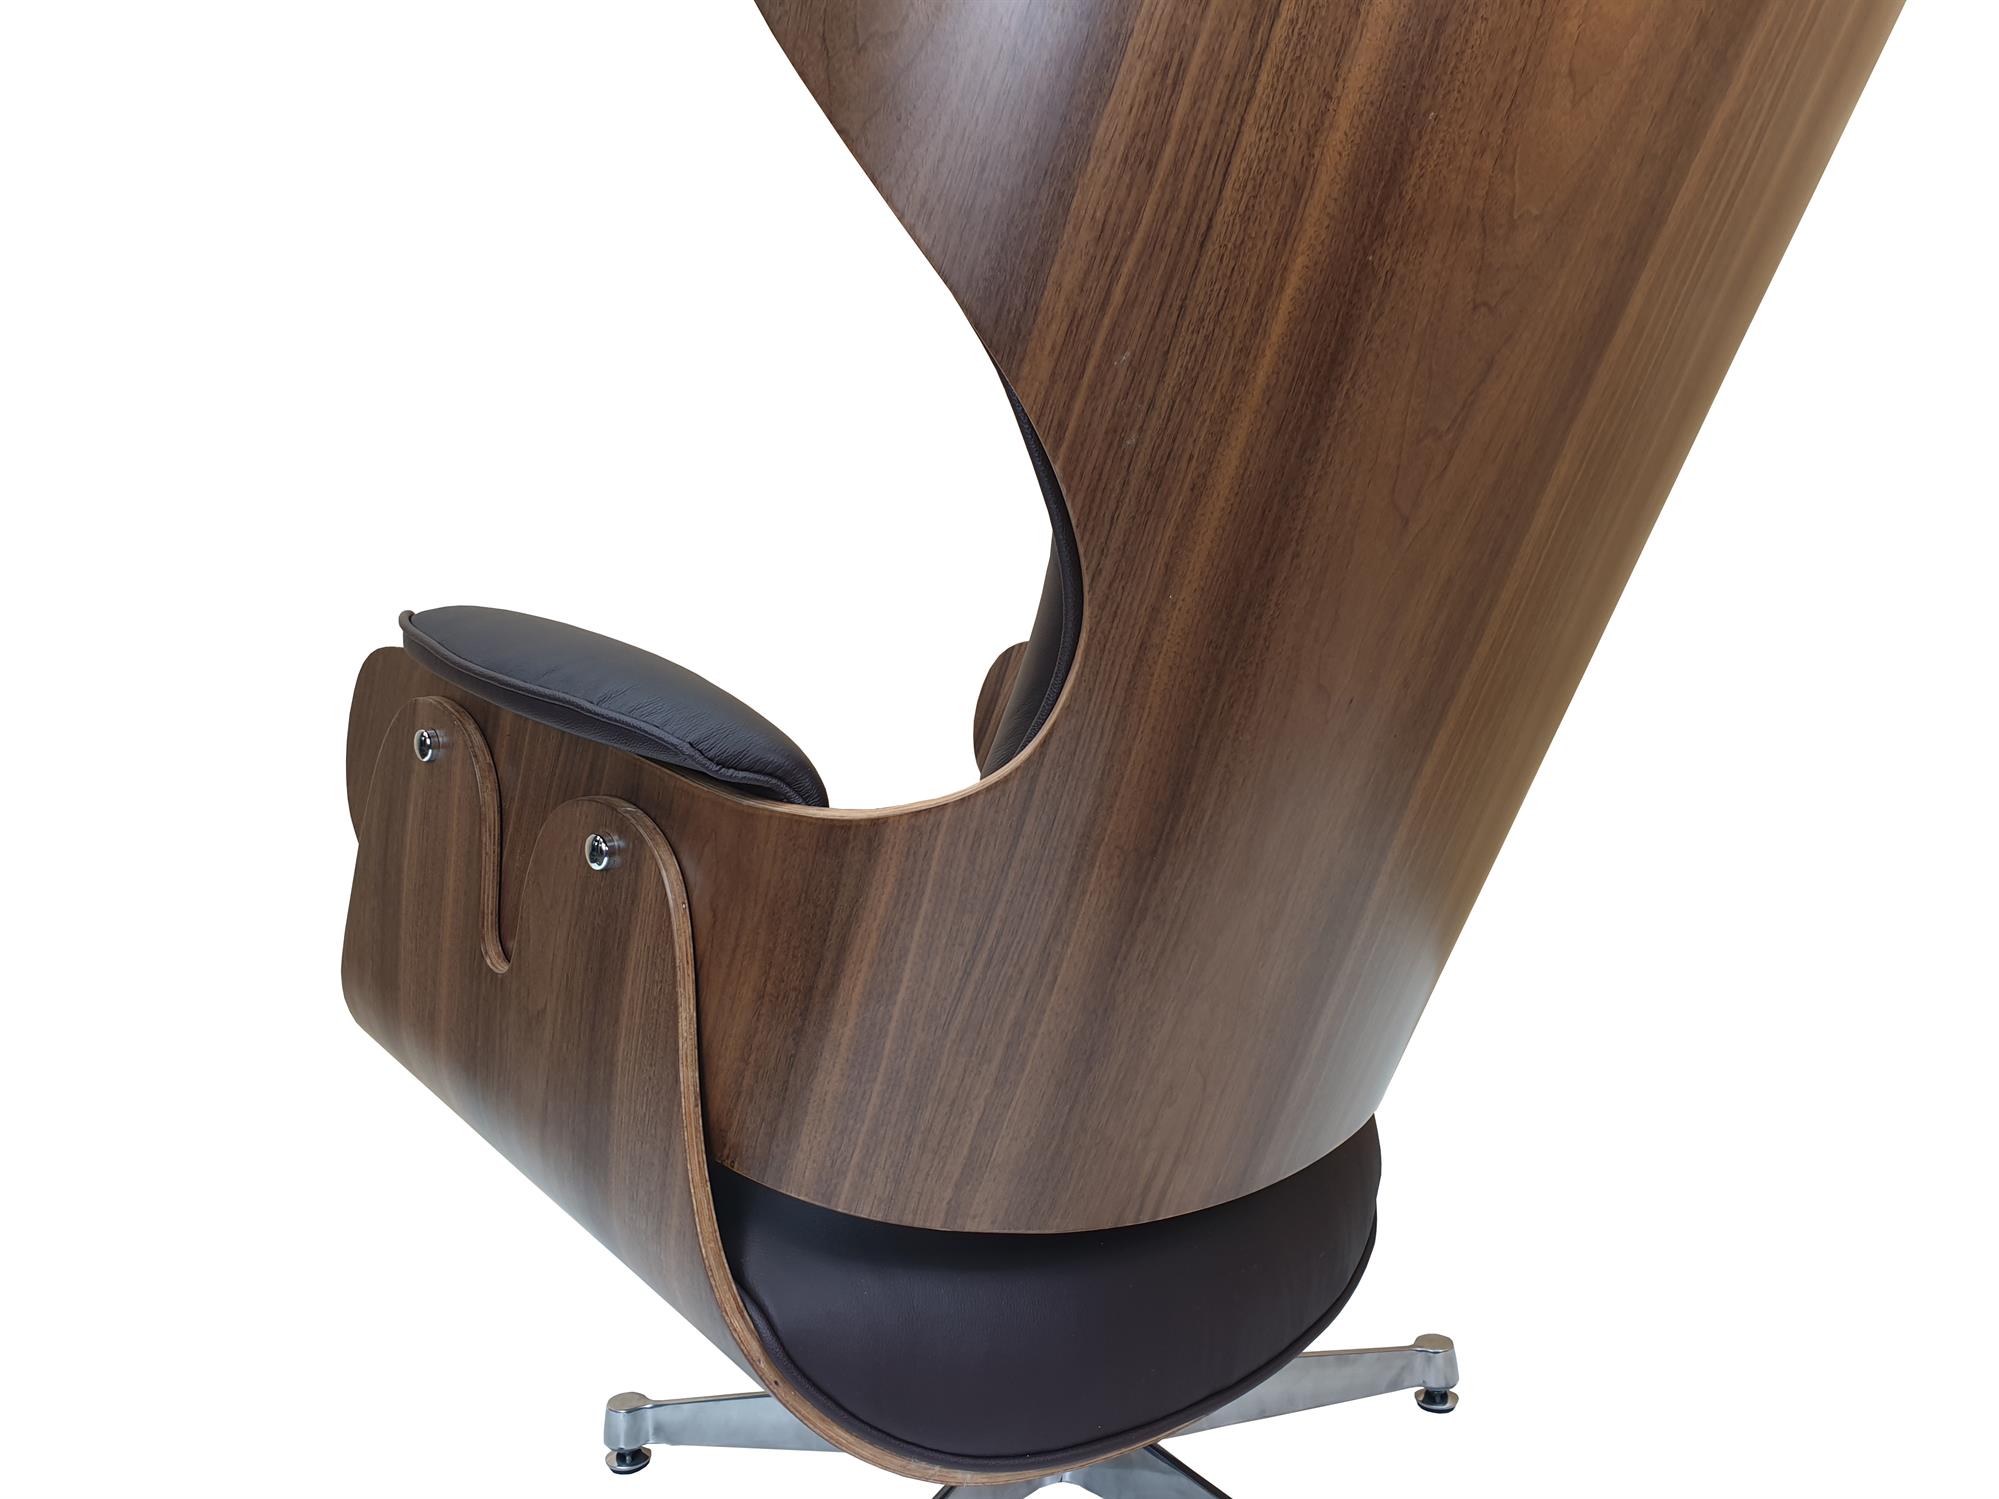 Designer Lounge chair with Ottoman Walnut wood with Brown ...